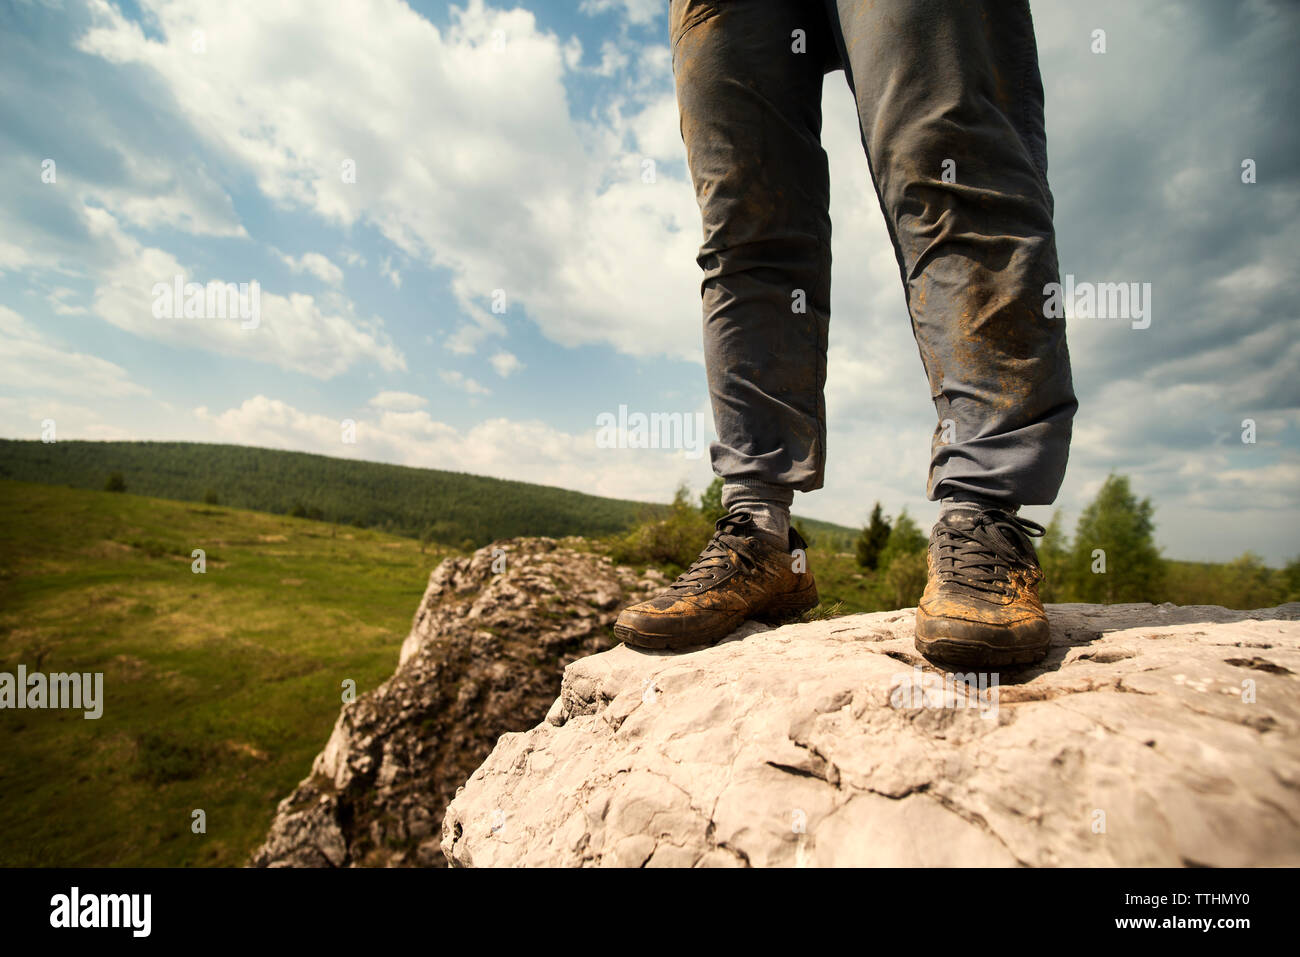 Low section of person standing on rock against sky Stock Photo